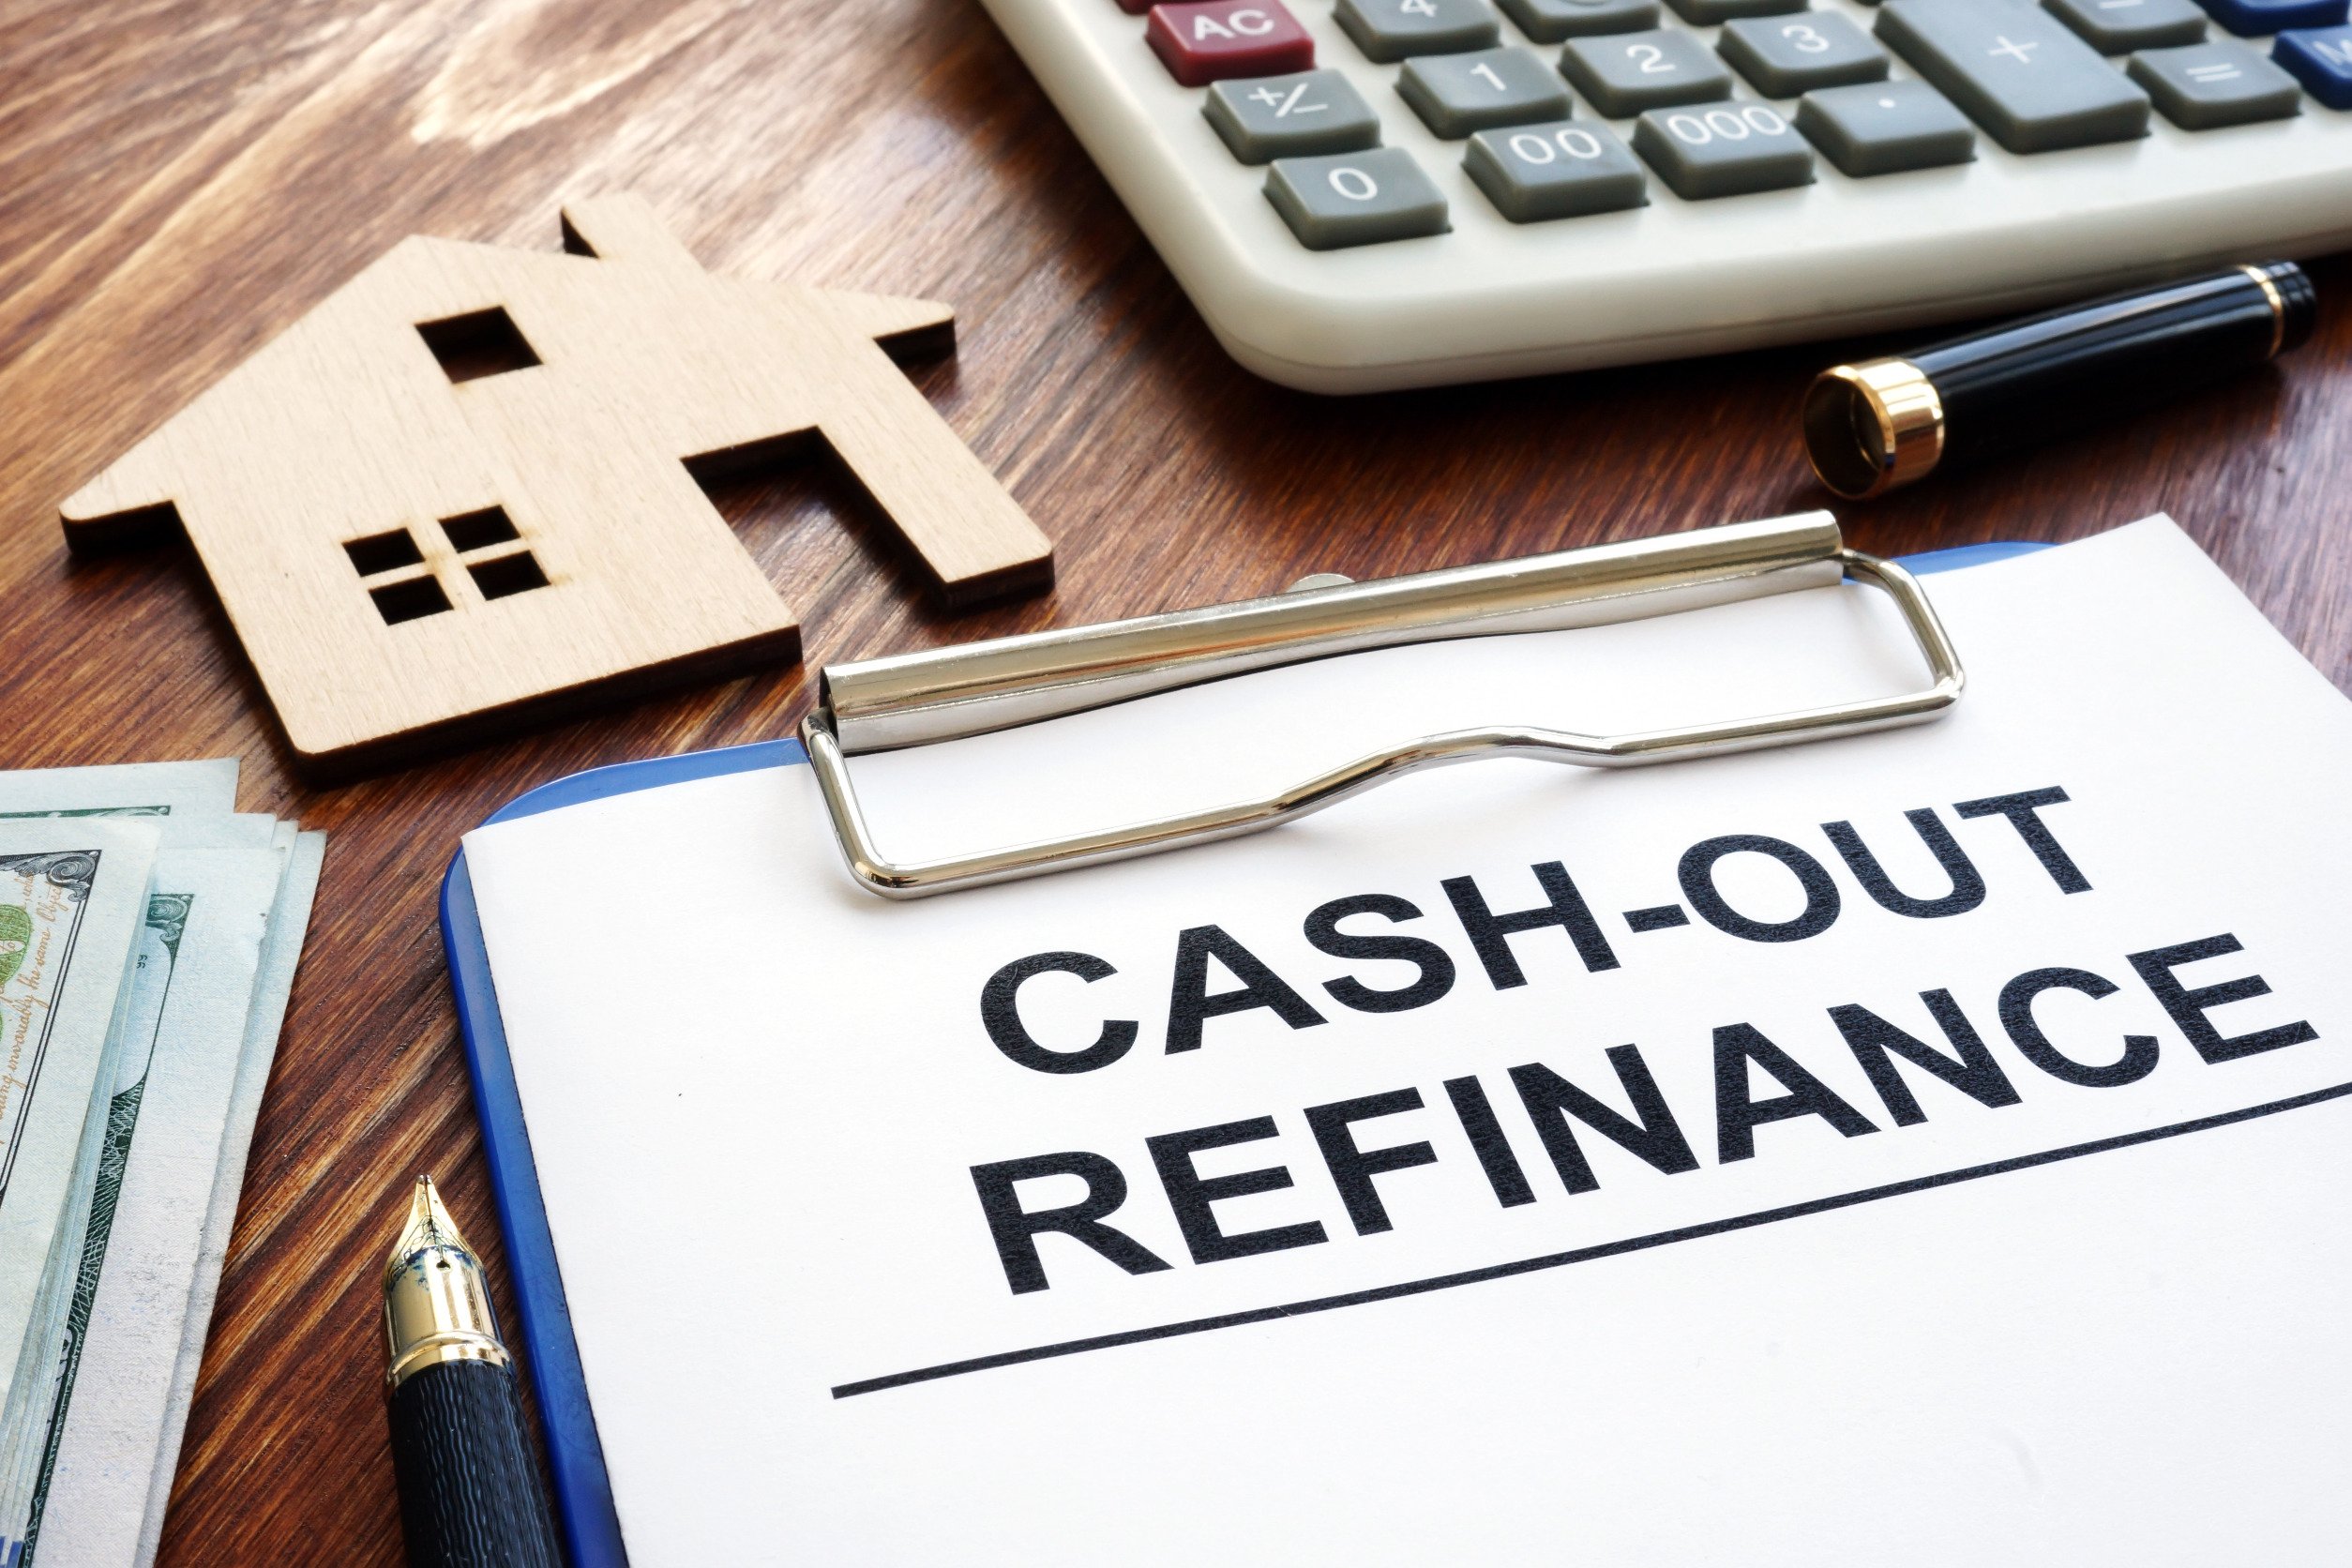 Opportunities for Cash-Out Refinance Near Me – Important Facts You Need to Know